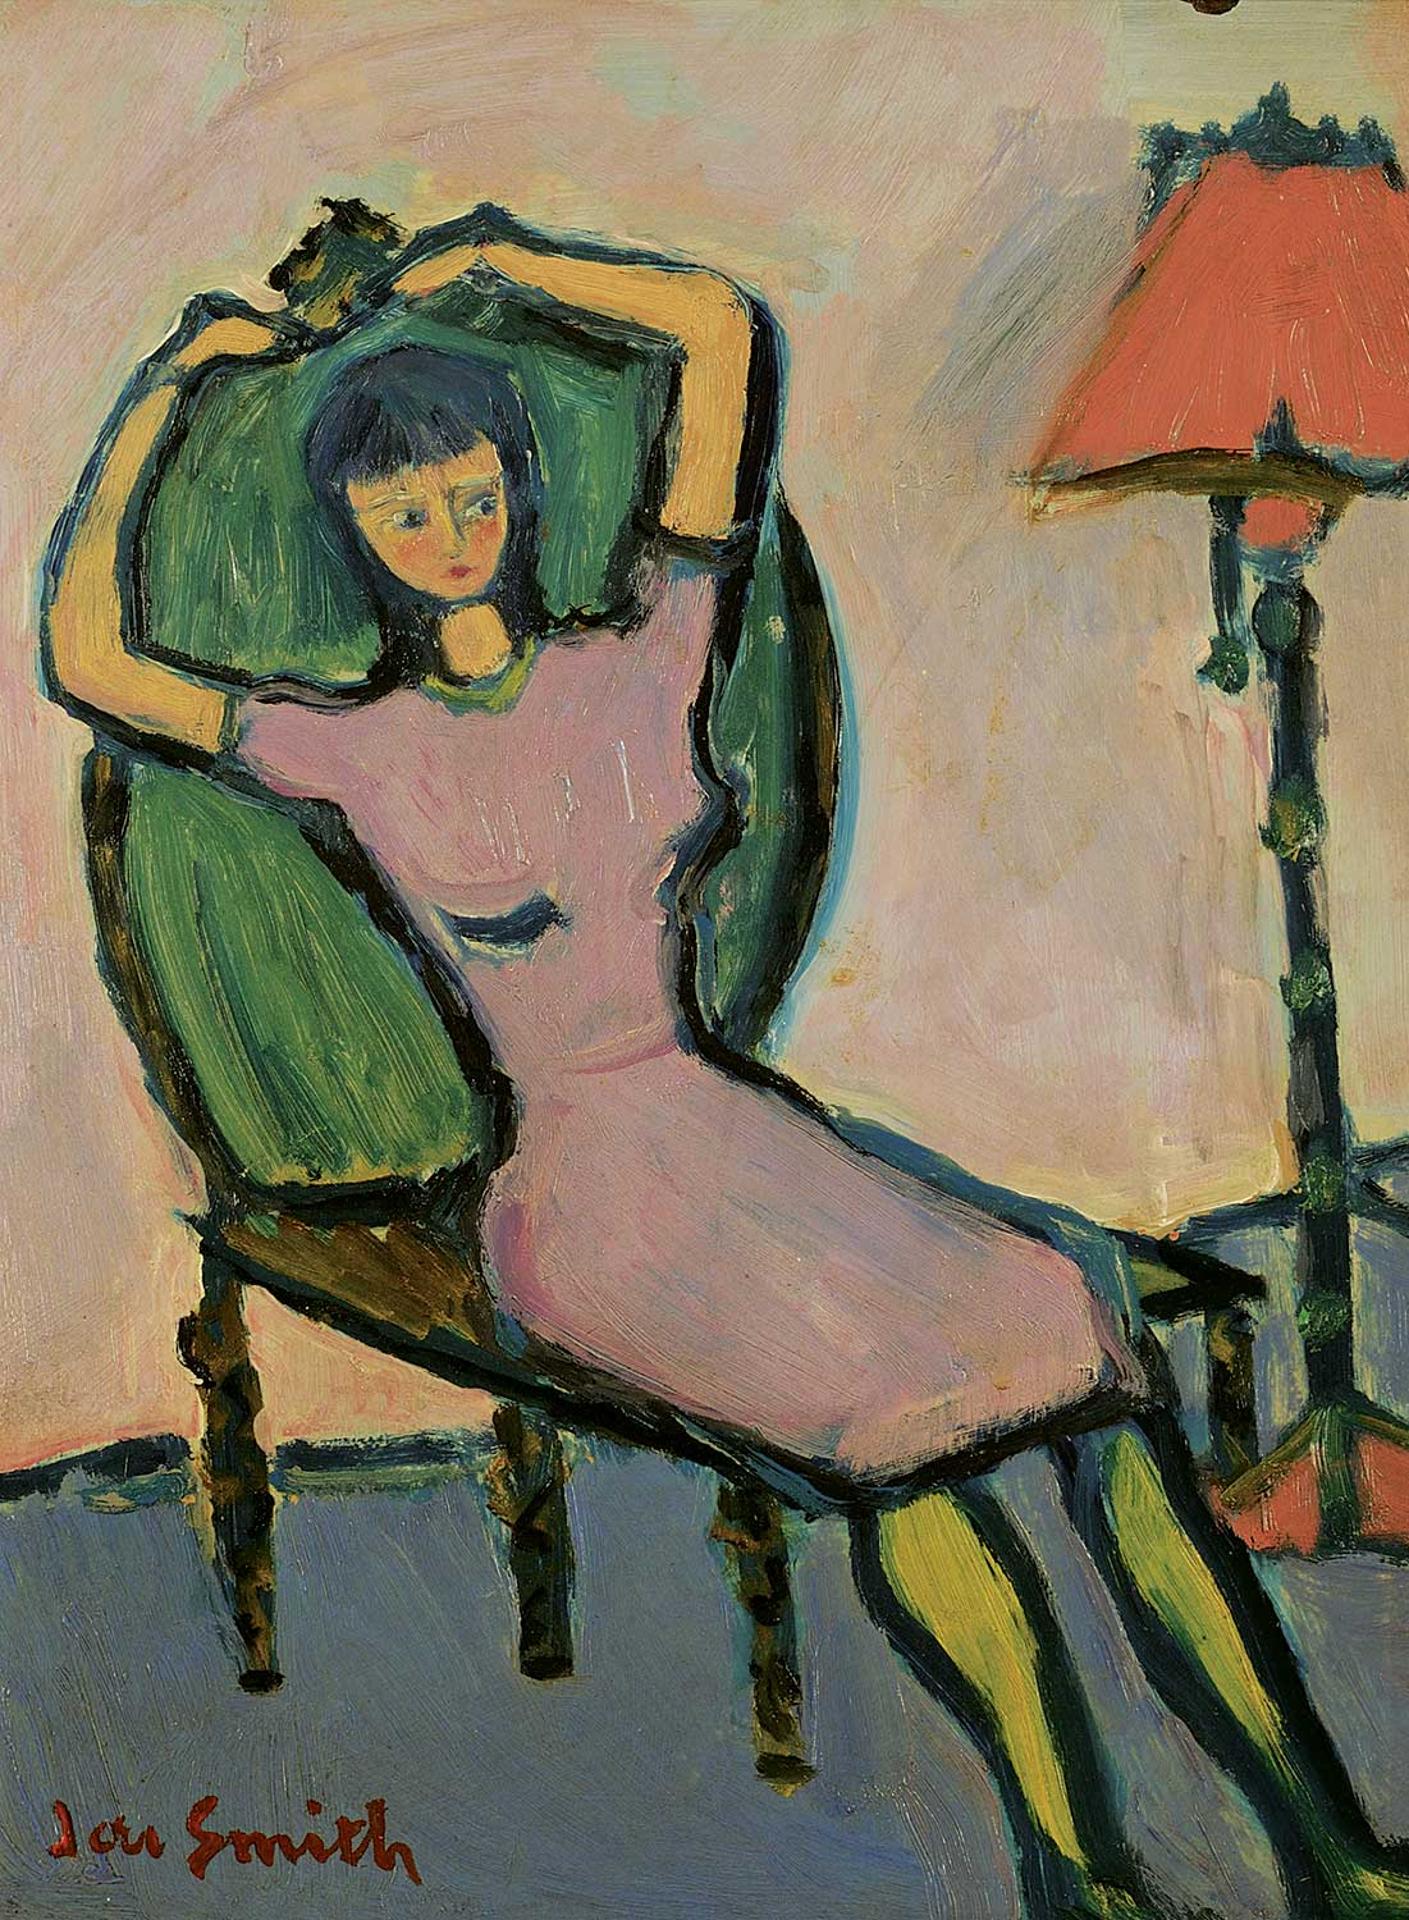 Jori (Marjorie) Smith (1907-2005) - Untitled - Lady in a Green Chair